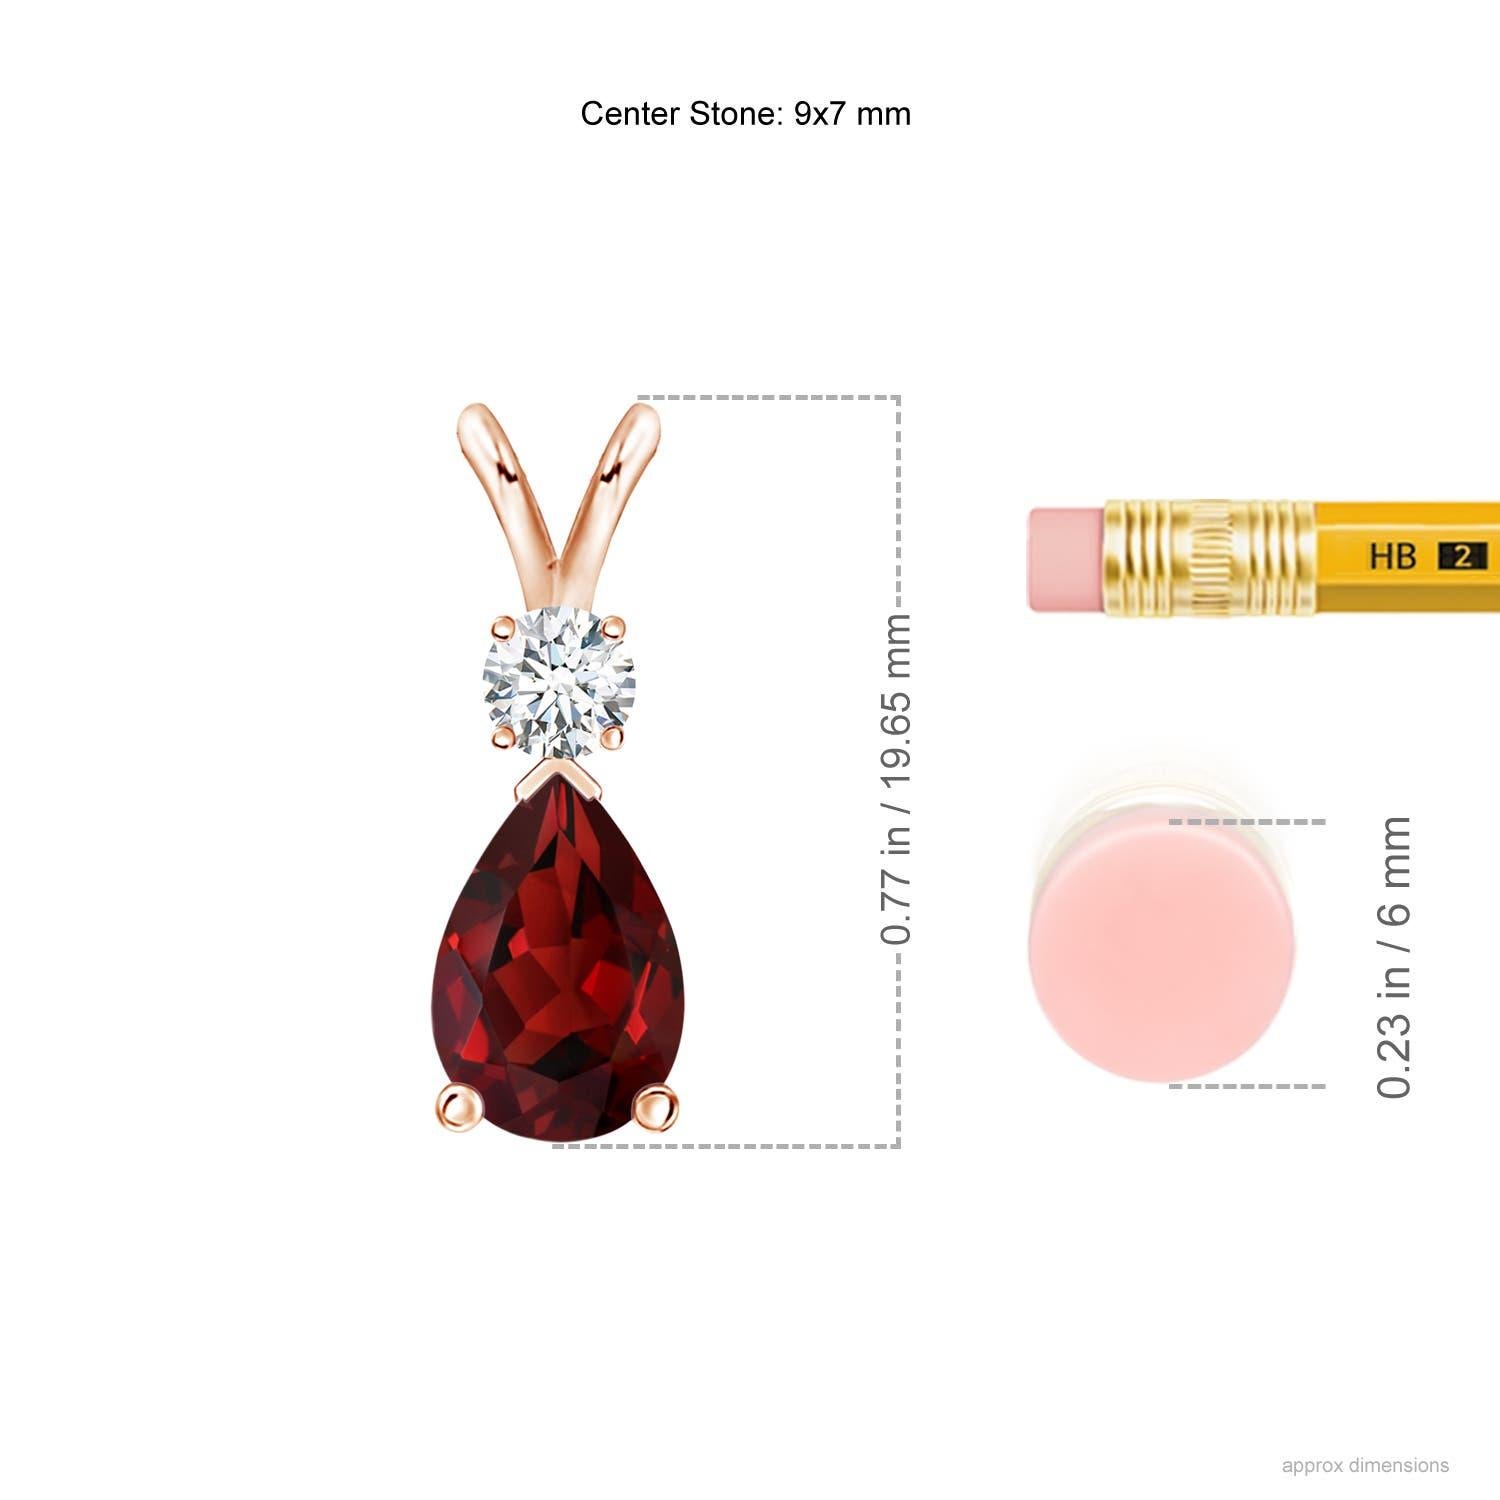 A pear-shaped intense red garnet is secured in a prong setting and embellished with a diamond accent on the top. Simple yet stunning, this teardrop garnet pendant with V bale is sculpted in 14k rose gold.